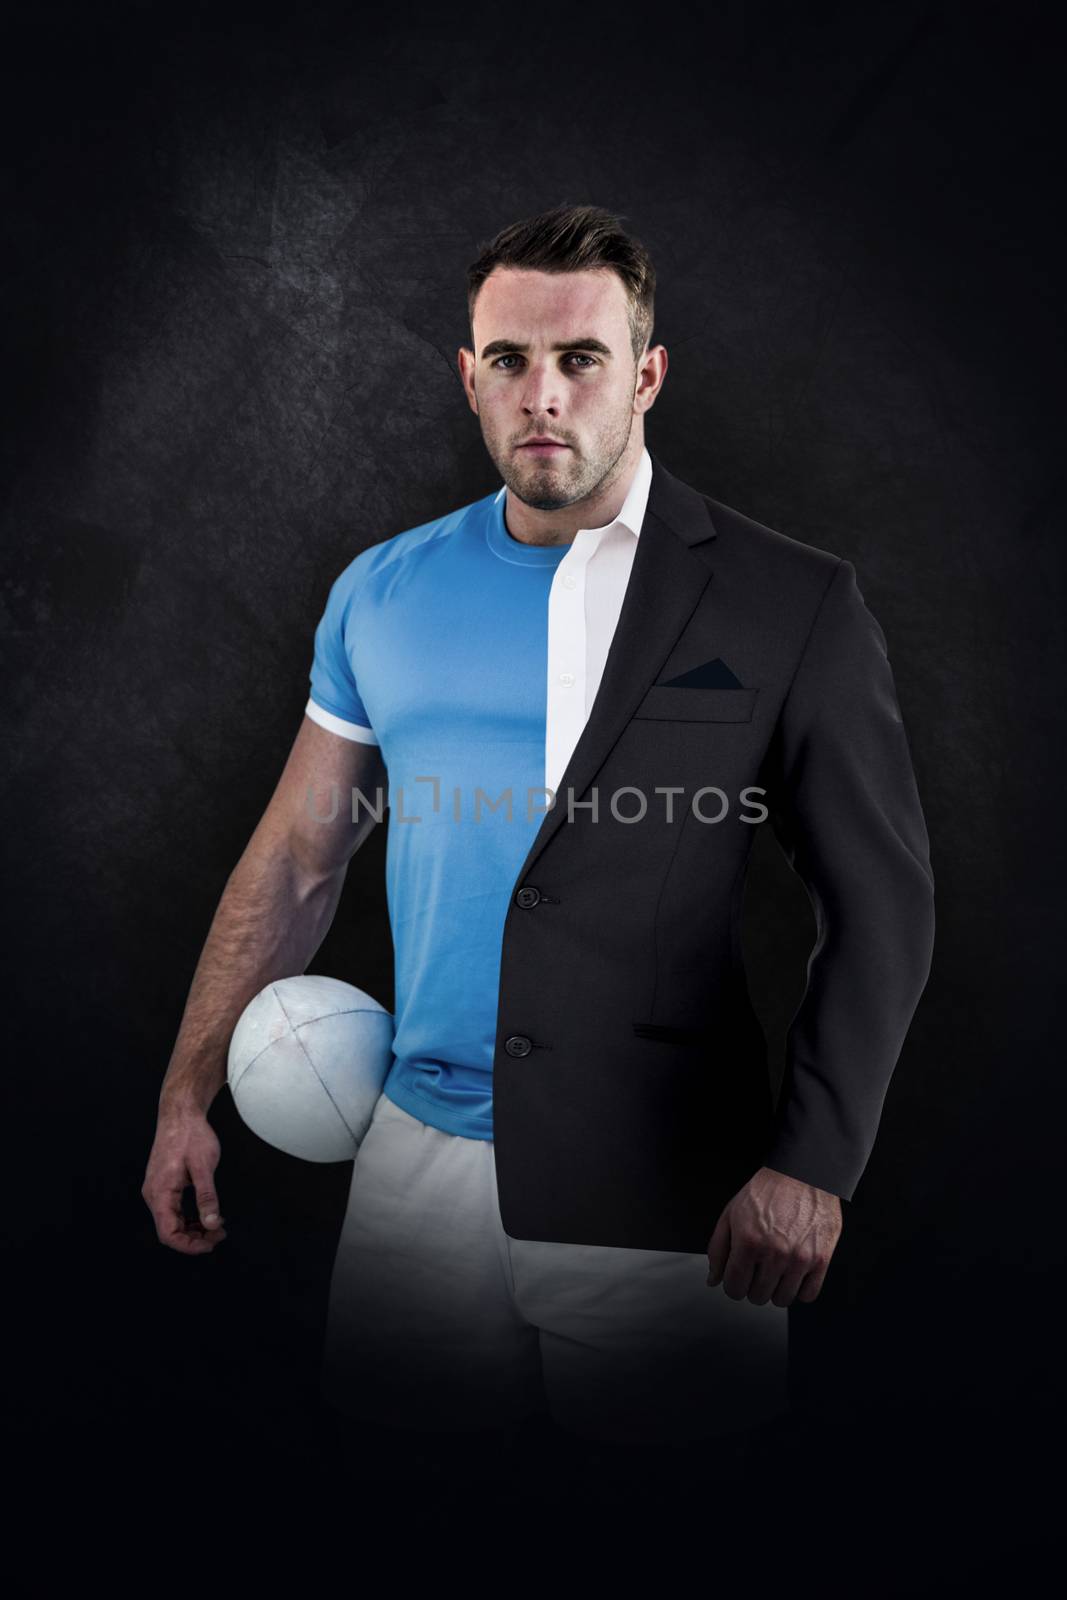 Rugby player looking at camera against half a suit